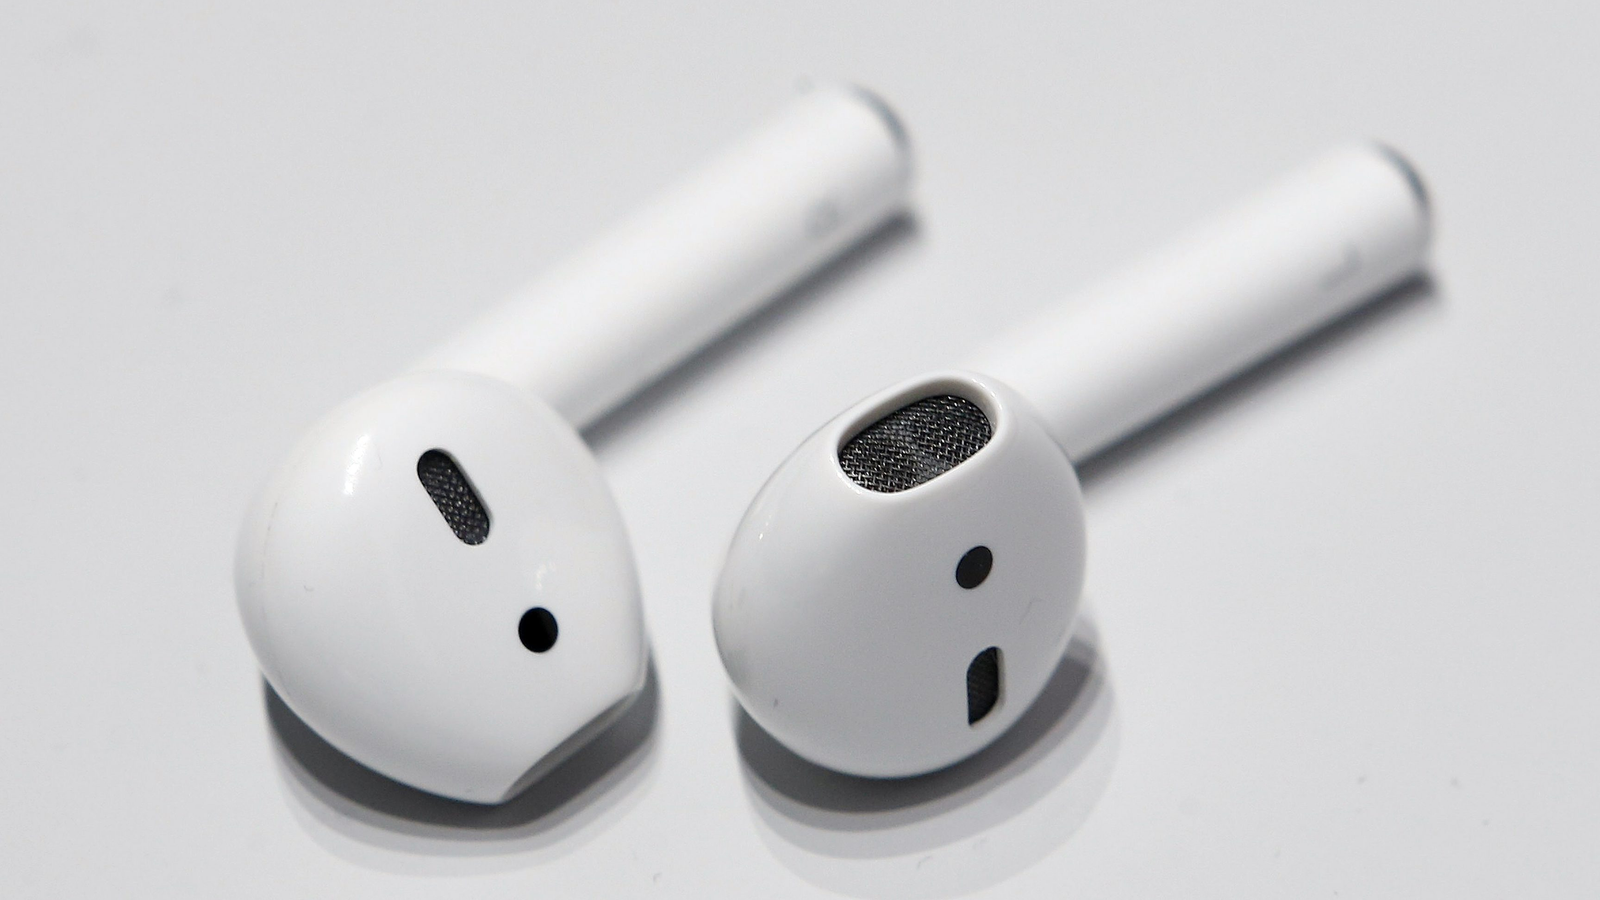 Why Are My Airpods So Quiet?